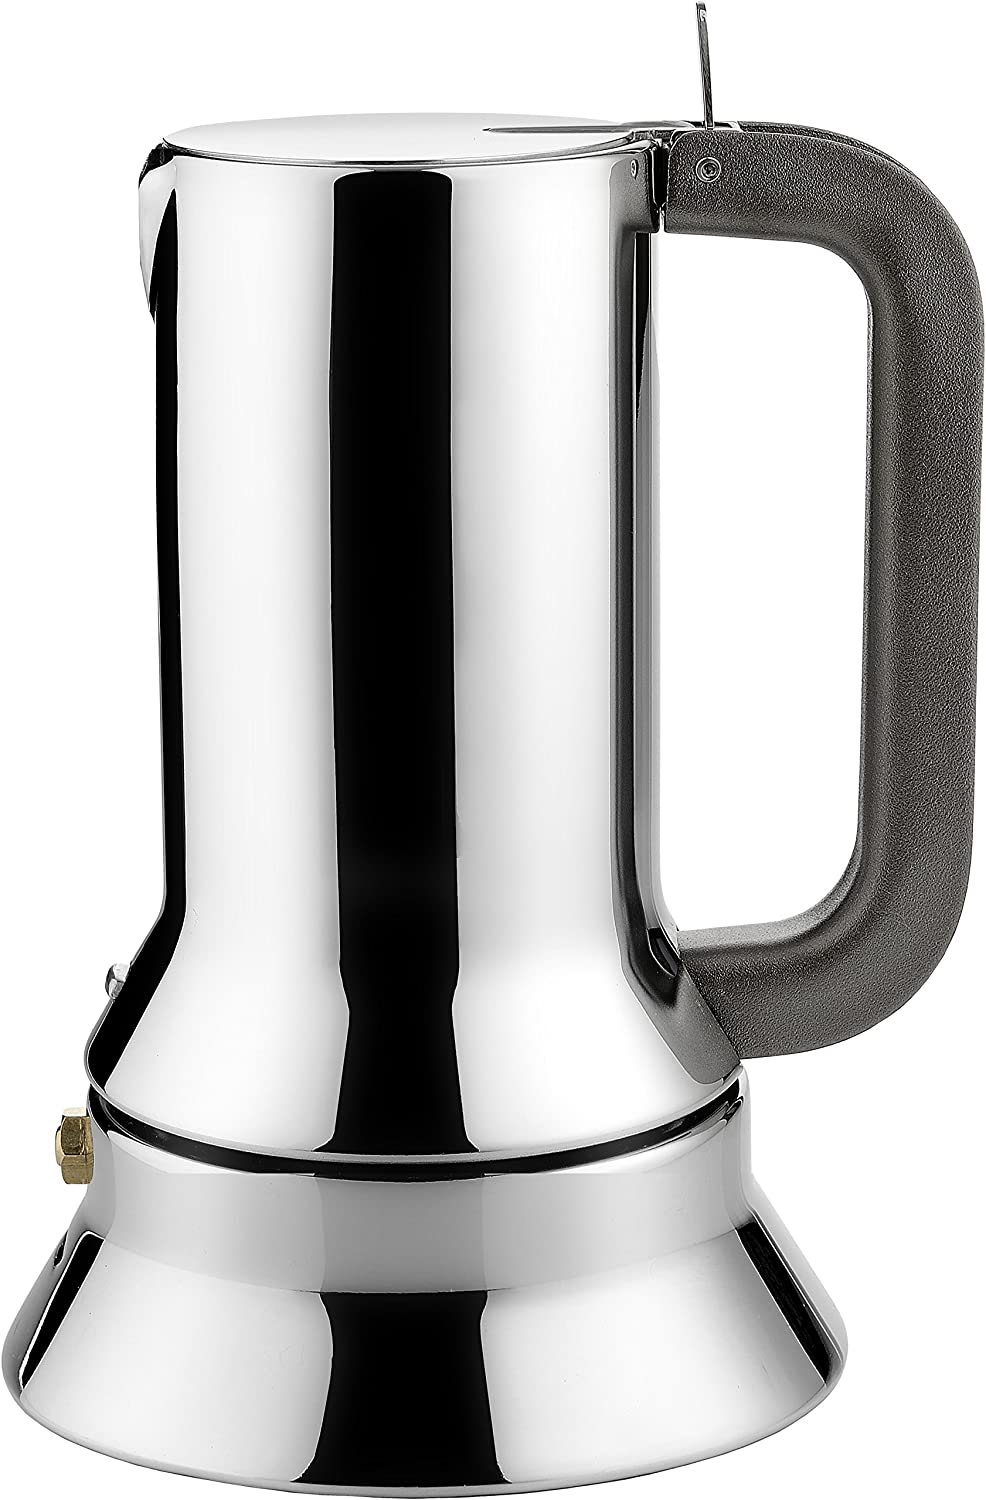 Alessi Espresso Coffee Maker in 18/10 Stainless Steel with Mirror Polished